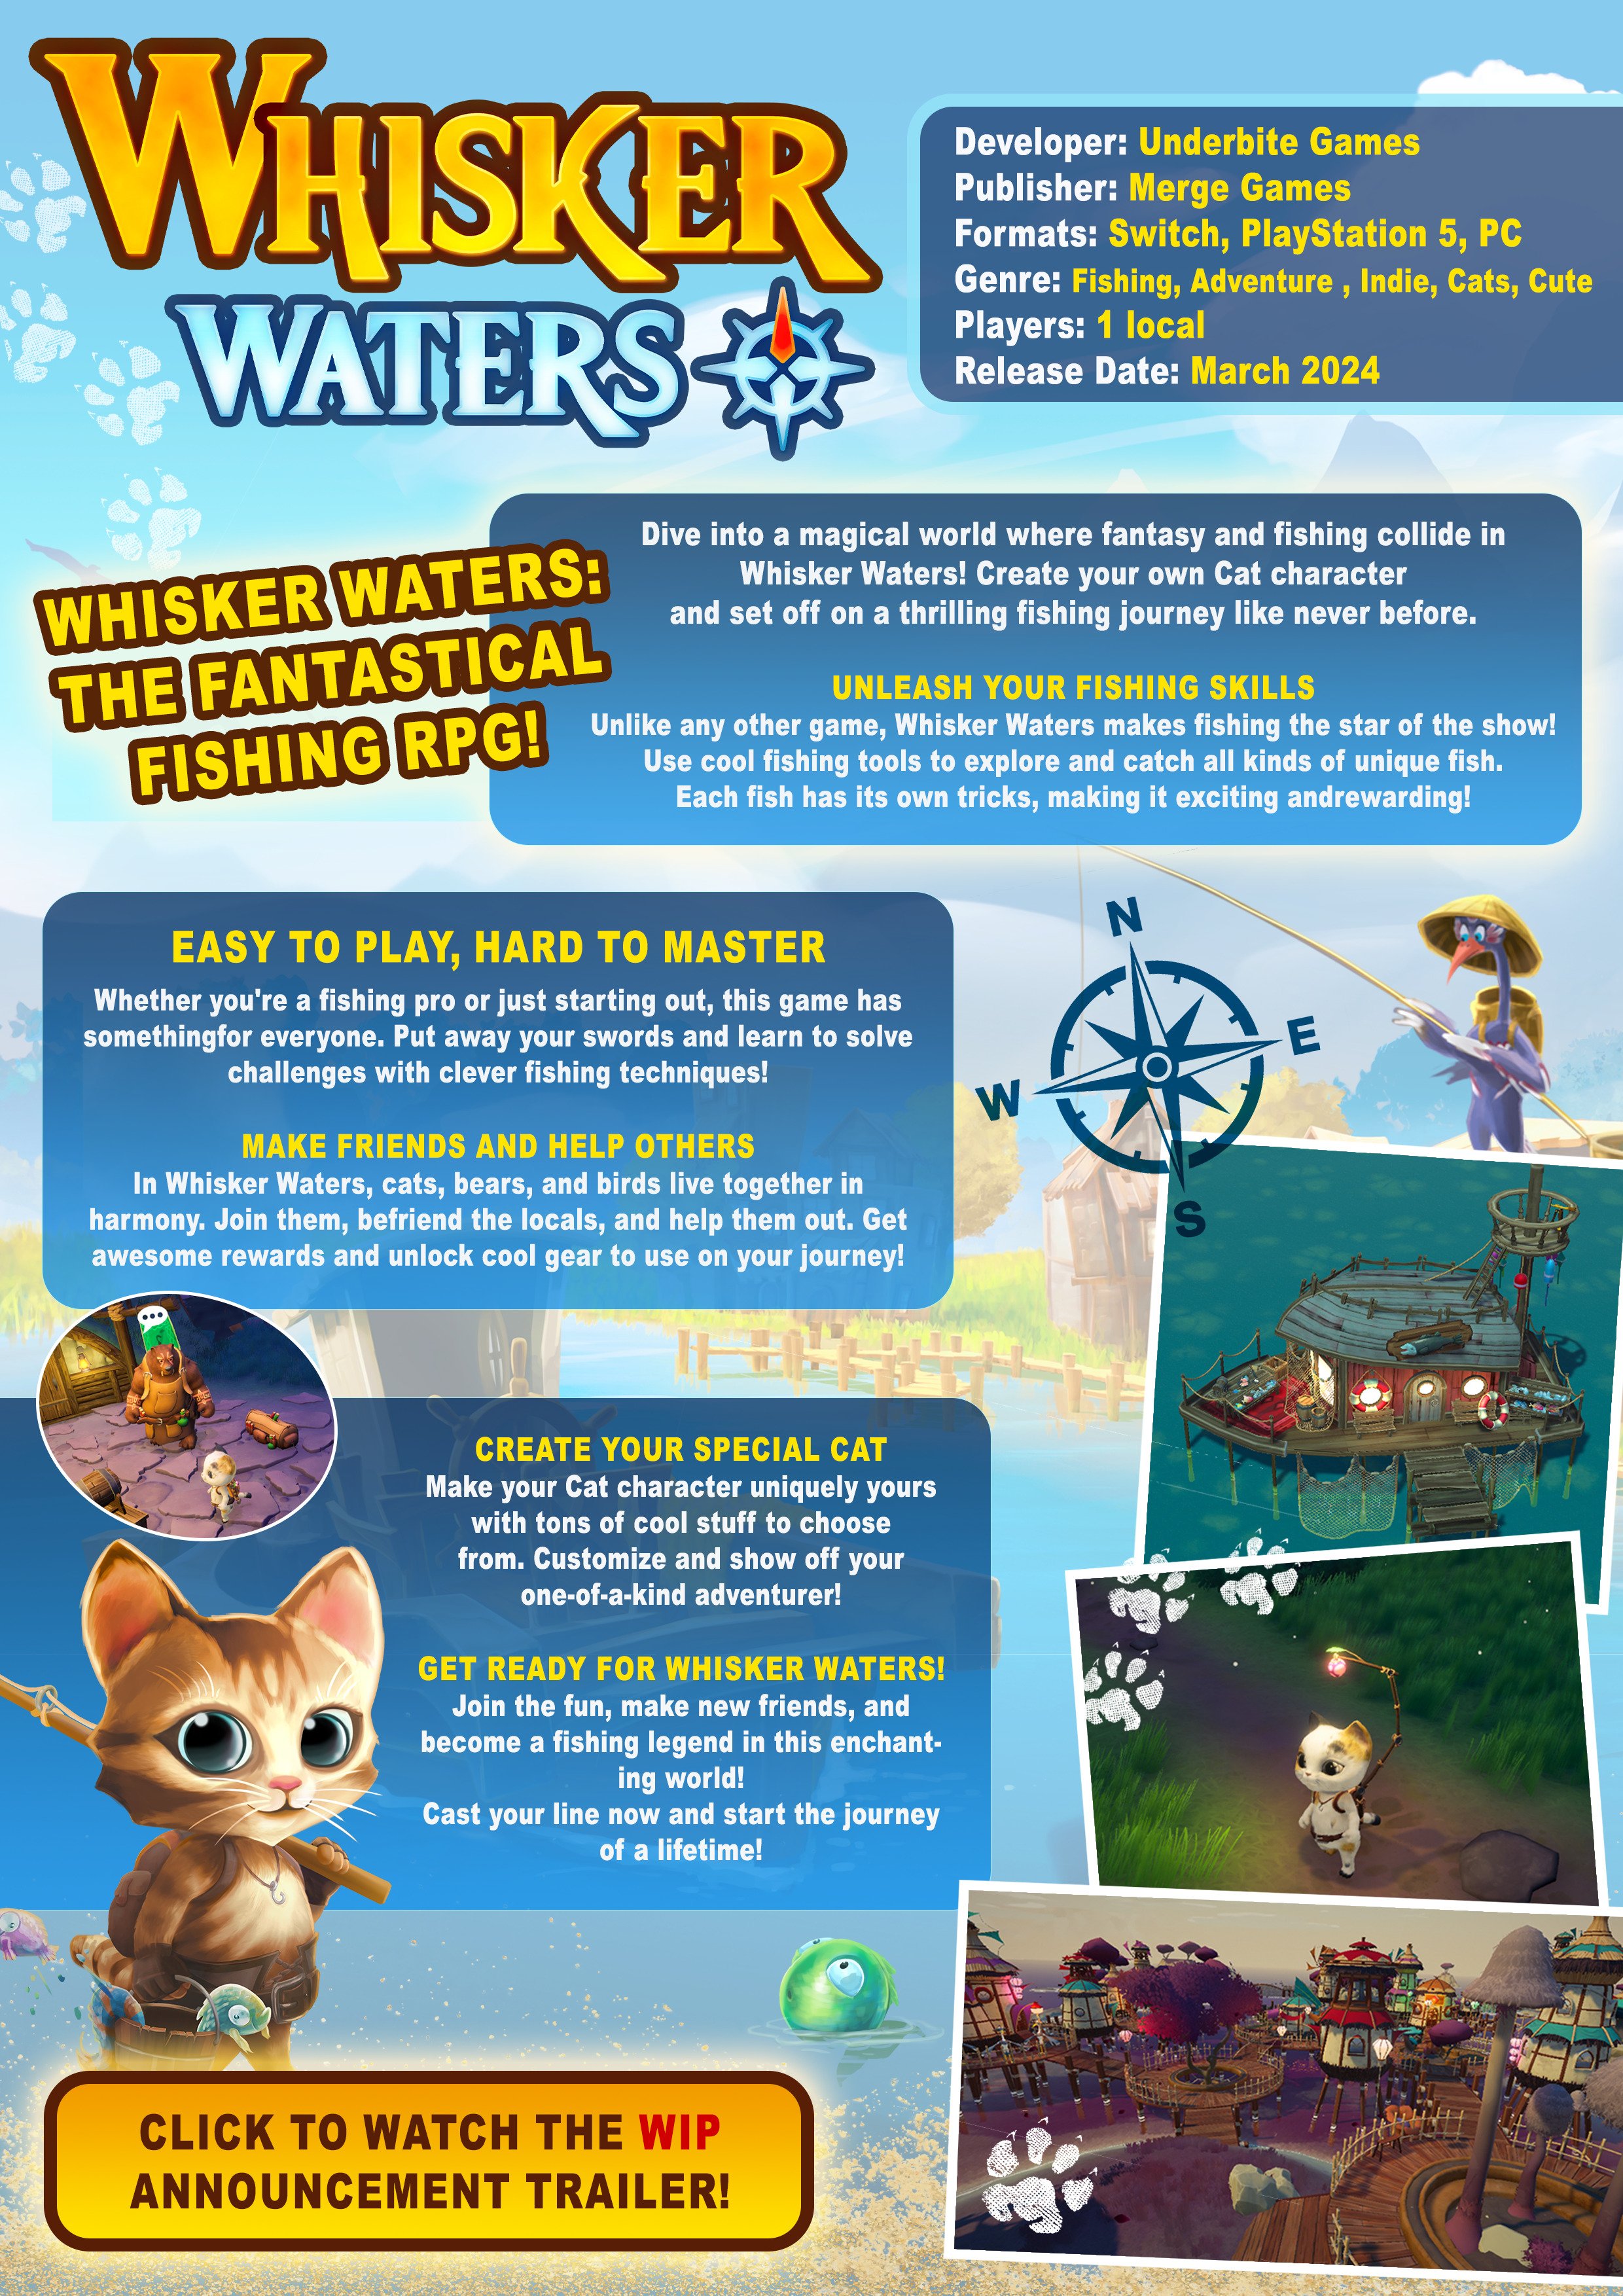 Fantasy fishing RPG Whisker Waters announced for PS5, Switch, and